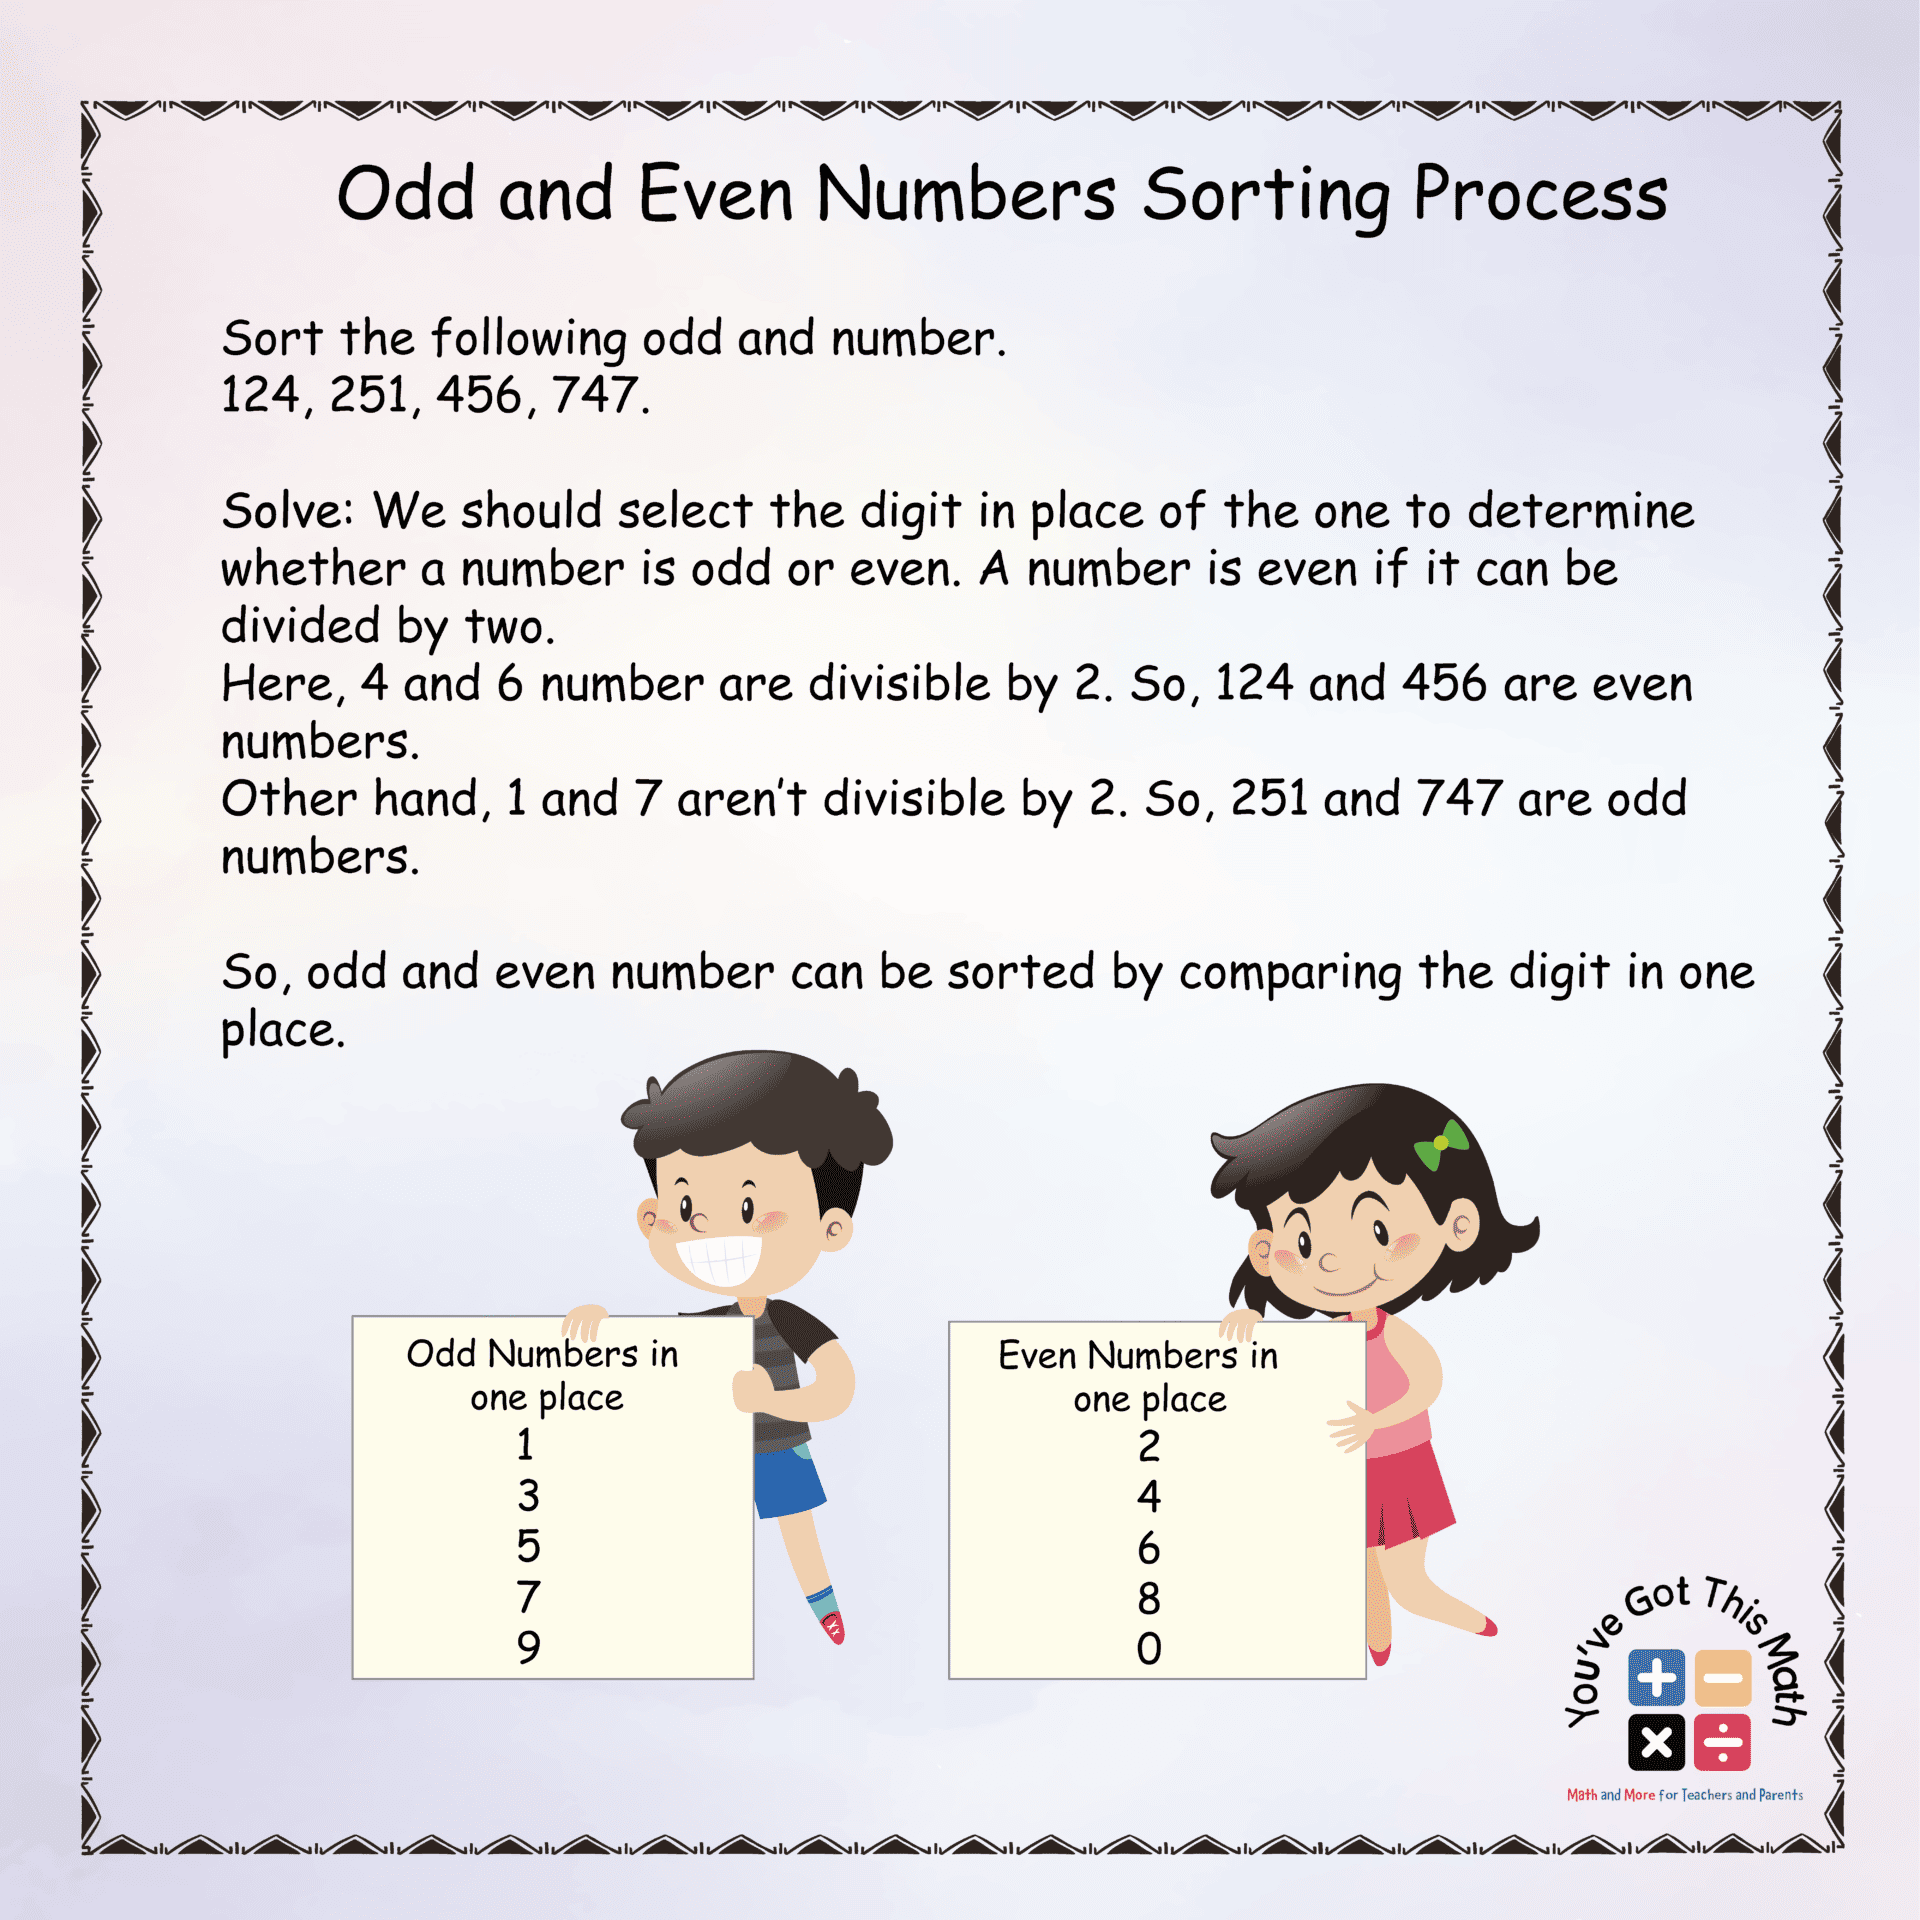 Odd and Even Numbers Sorting Process